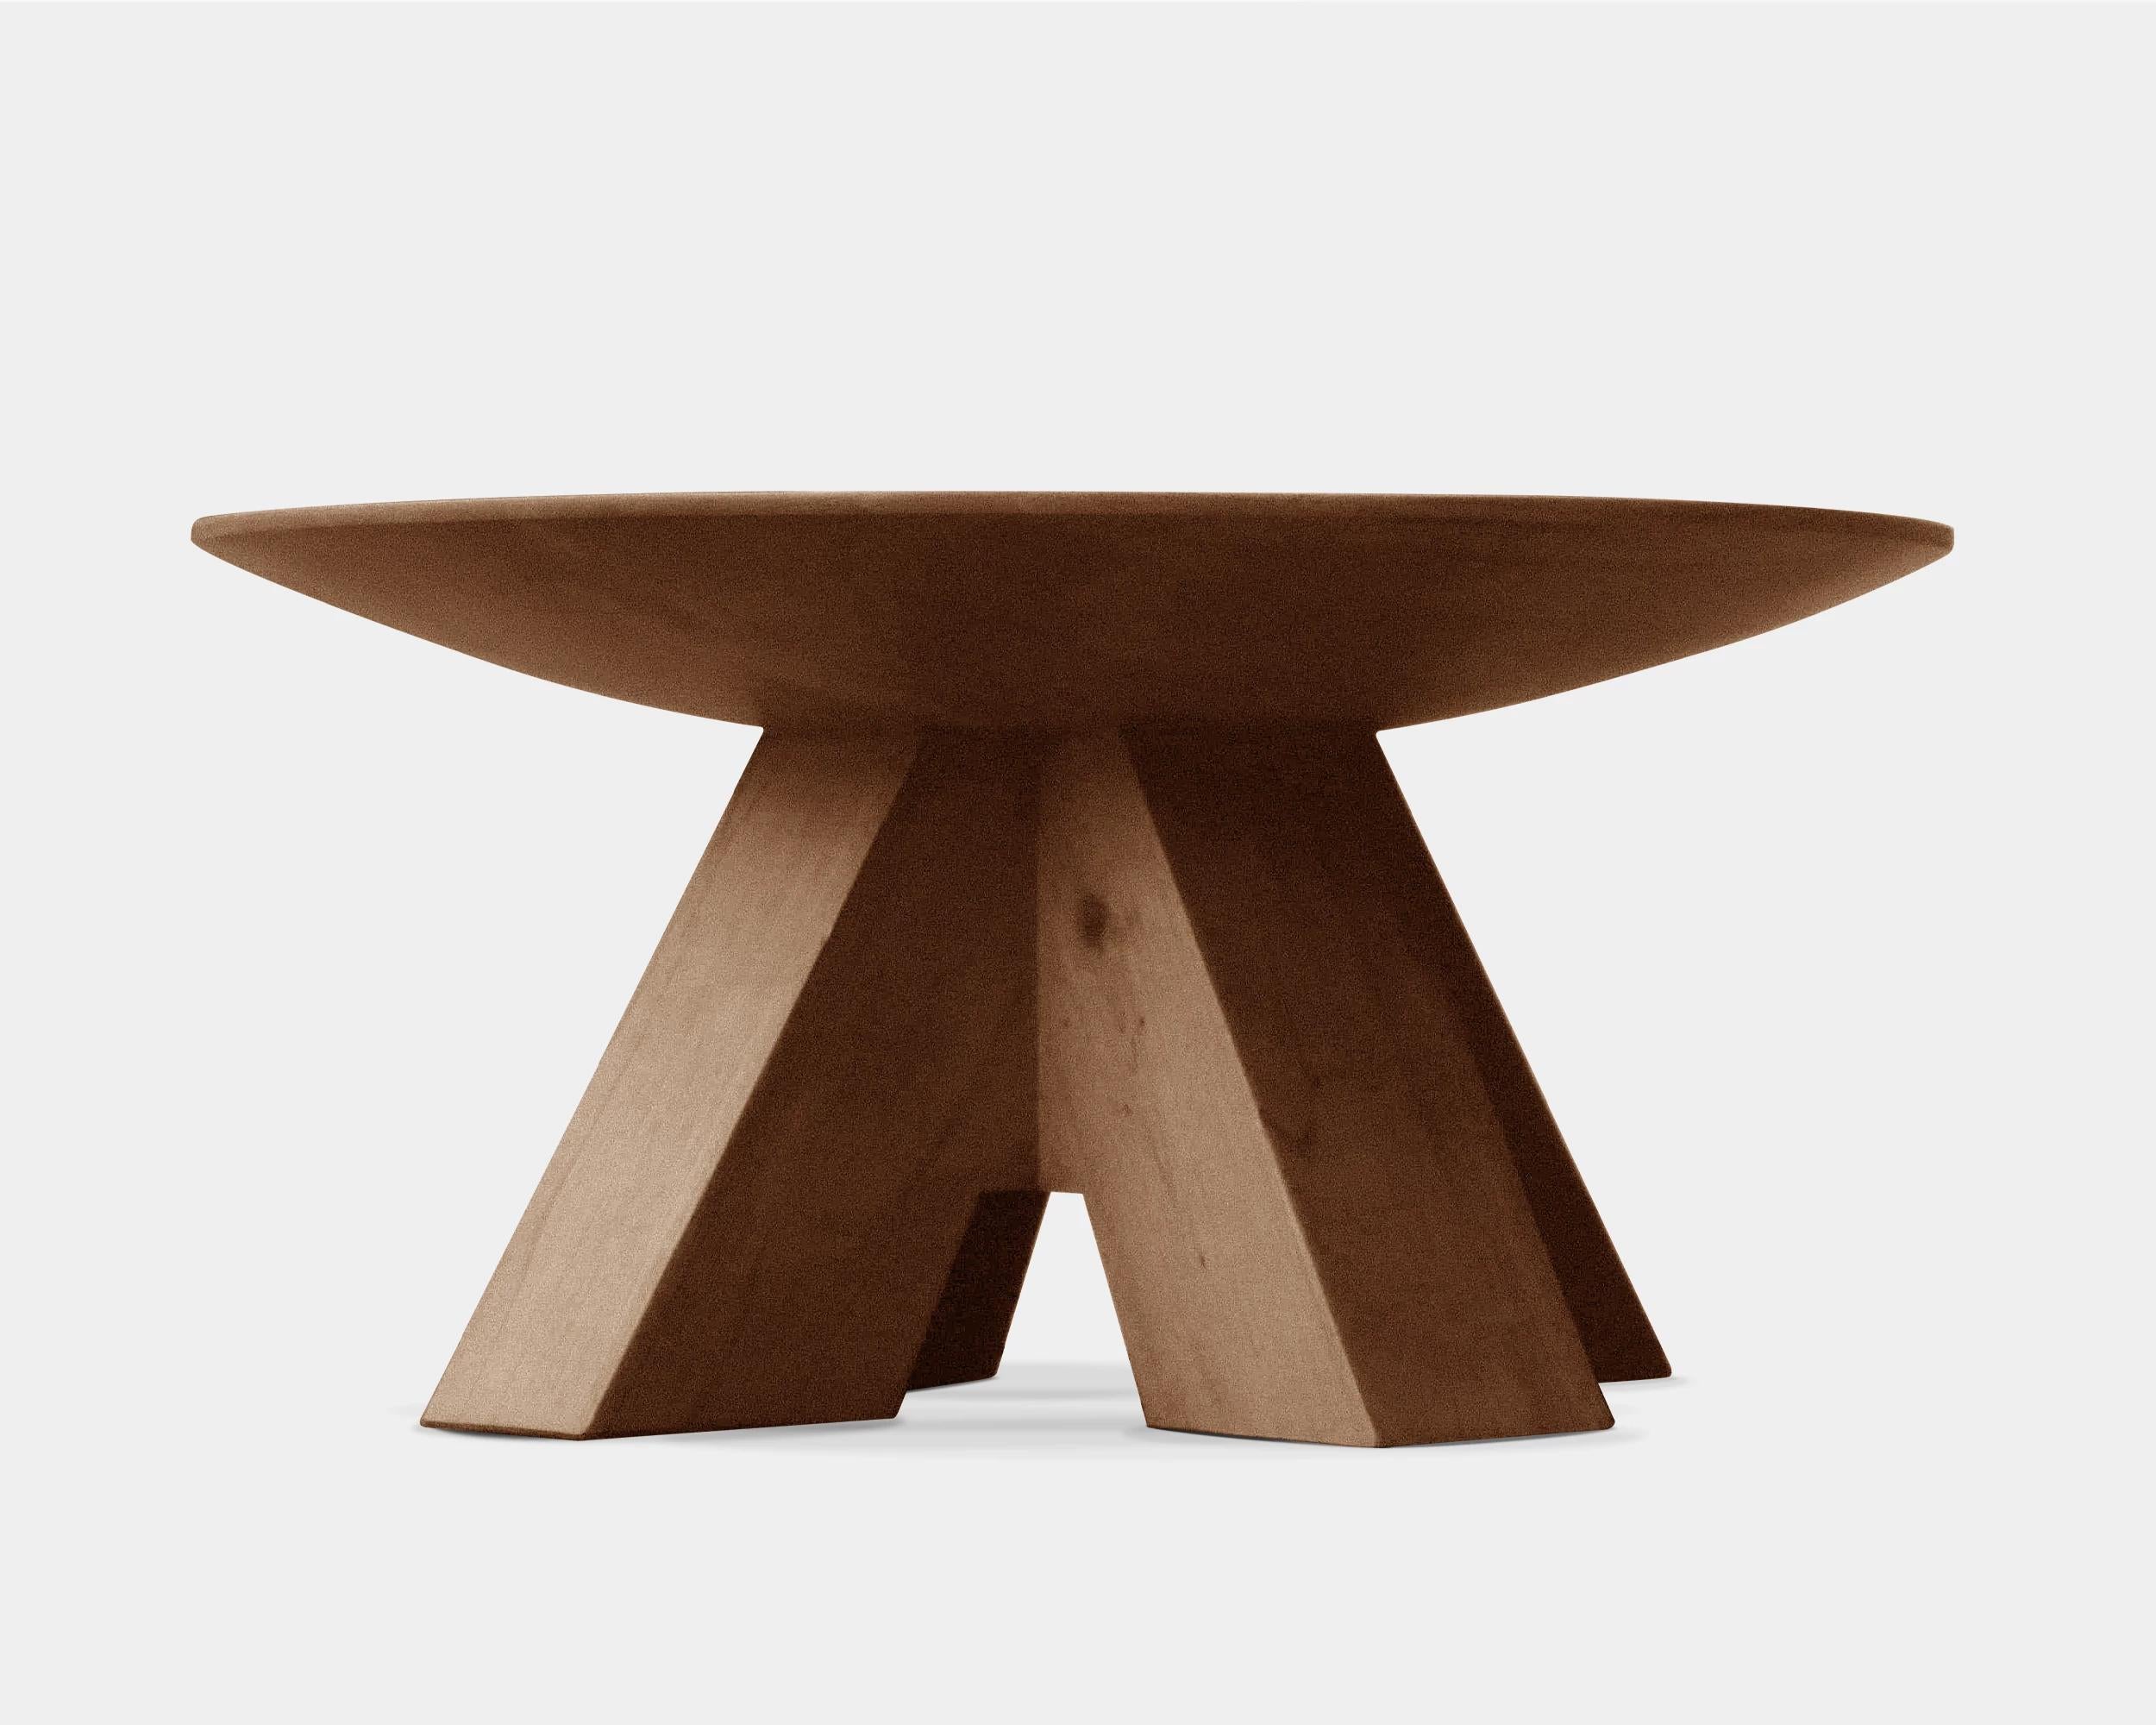 Coffee table Tenza 2 by Camilo Andres Rodriguez Marquez (aka CarmWorks)

Solid oak or cedar / Burnt wood or natural

Suitable for outdoor use

Each piece is made to order and hand crafted by the artist.

--
Camilo Andres Rodriguez Marquez